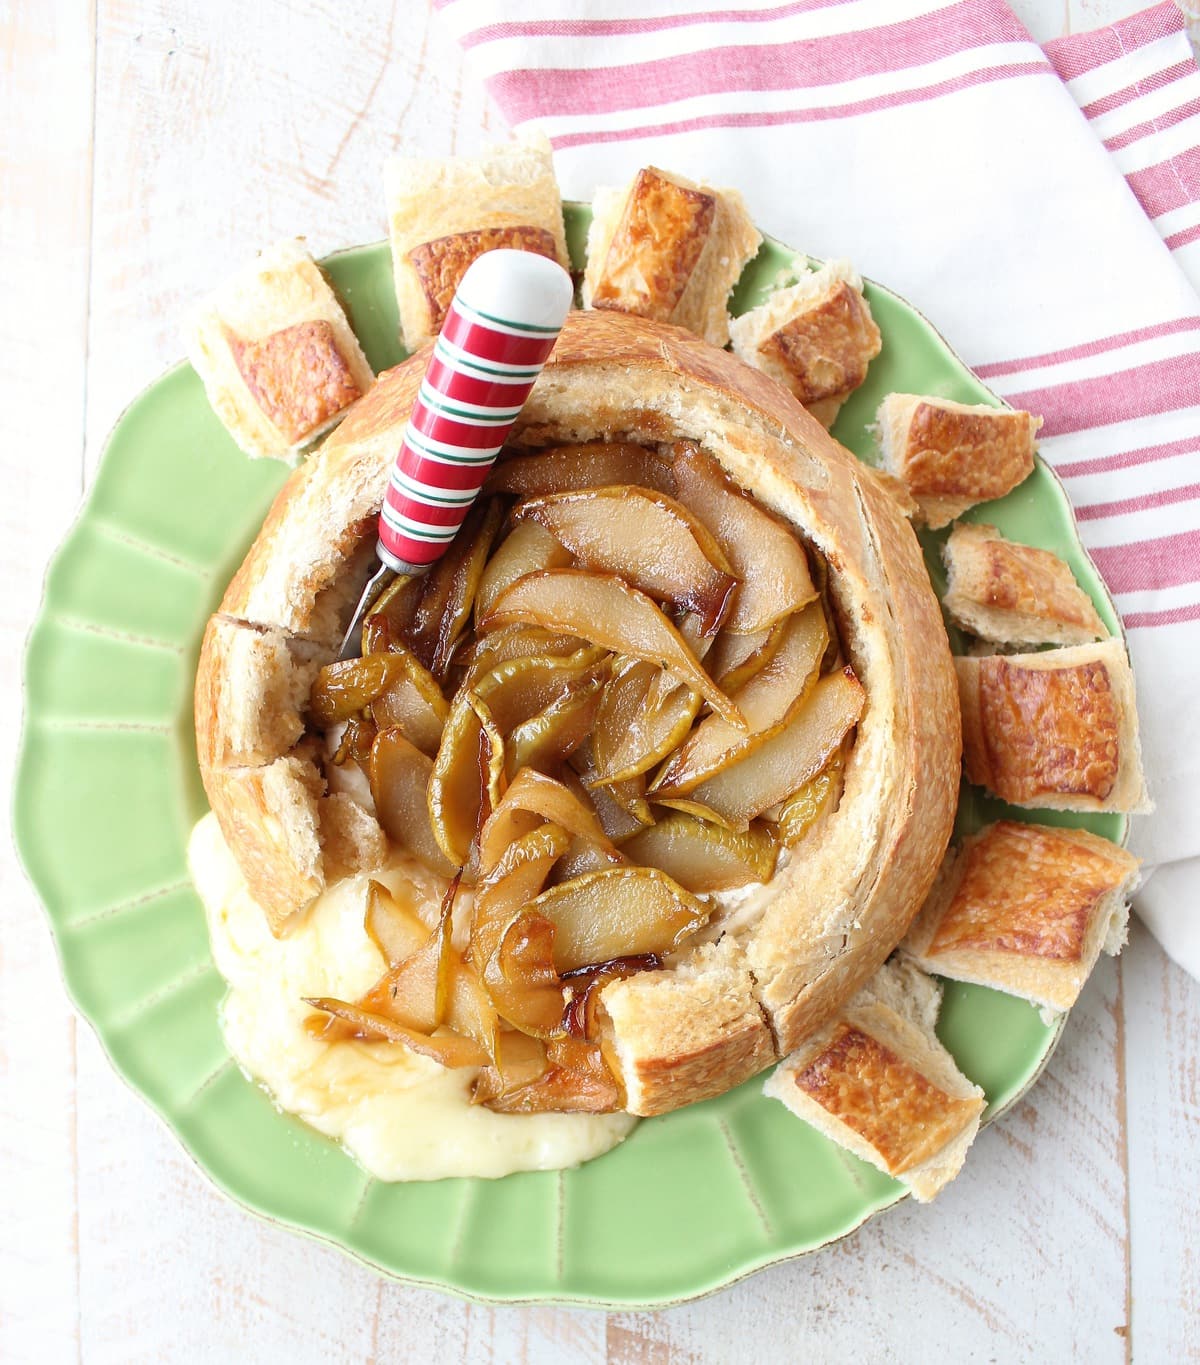 Baked brie in bread bowl with caramelized pears and honey on green plate with red and white cheese spreader and towel